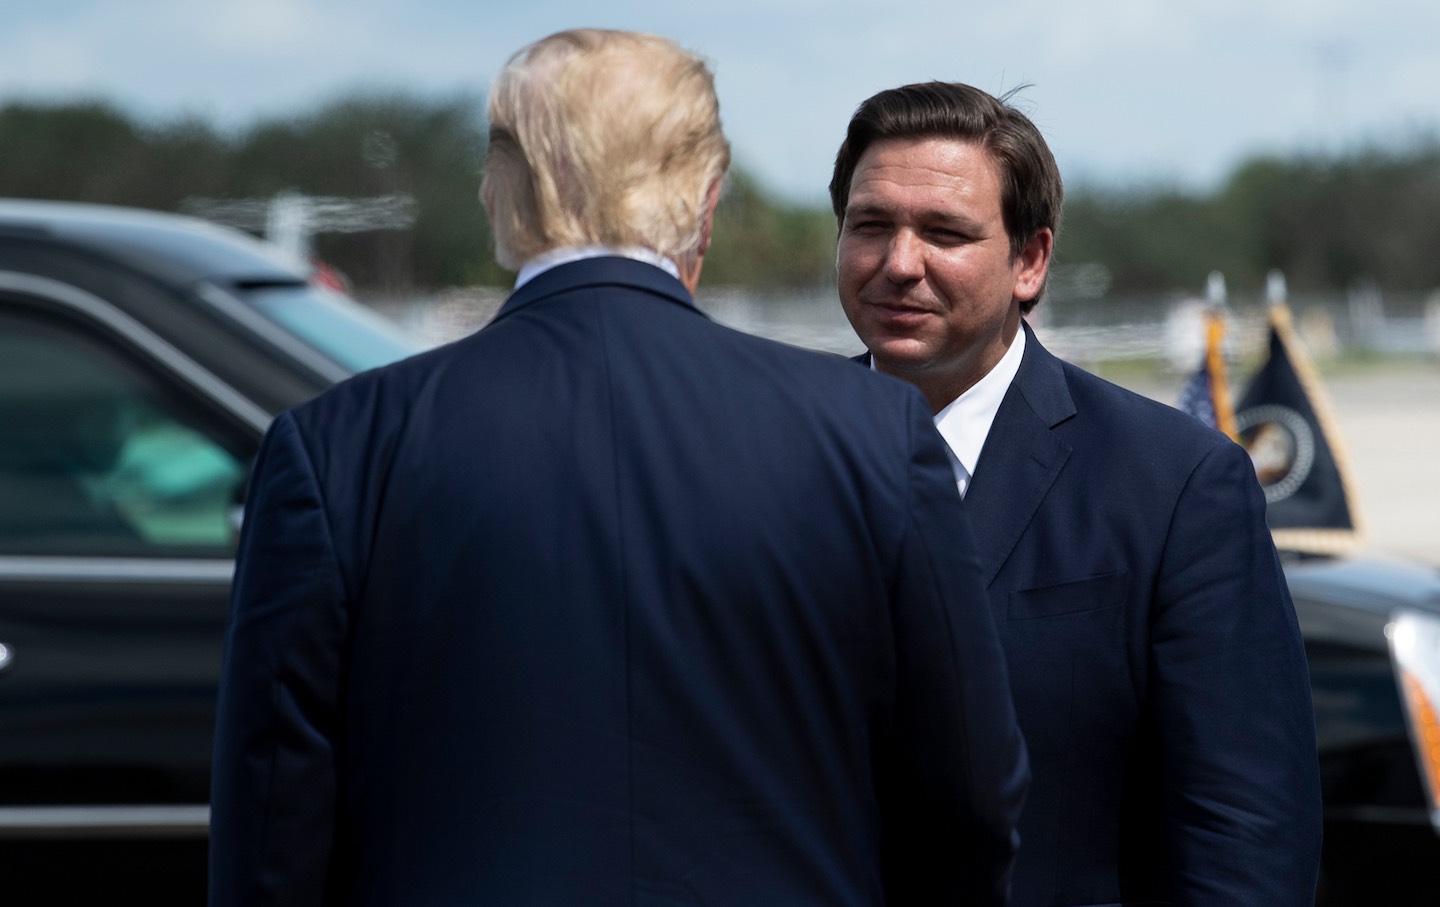 Donald Trump is greeted by Florida Governor Ron DeSantis